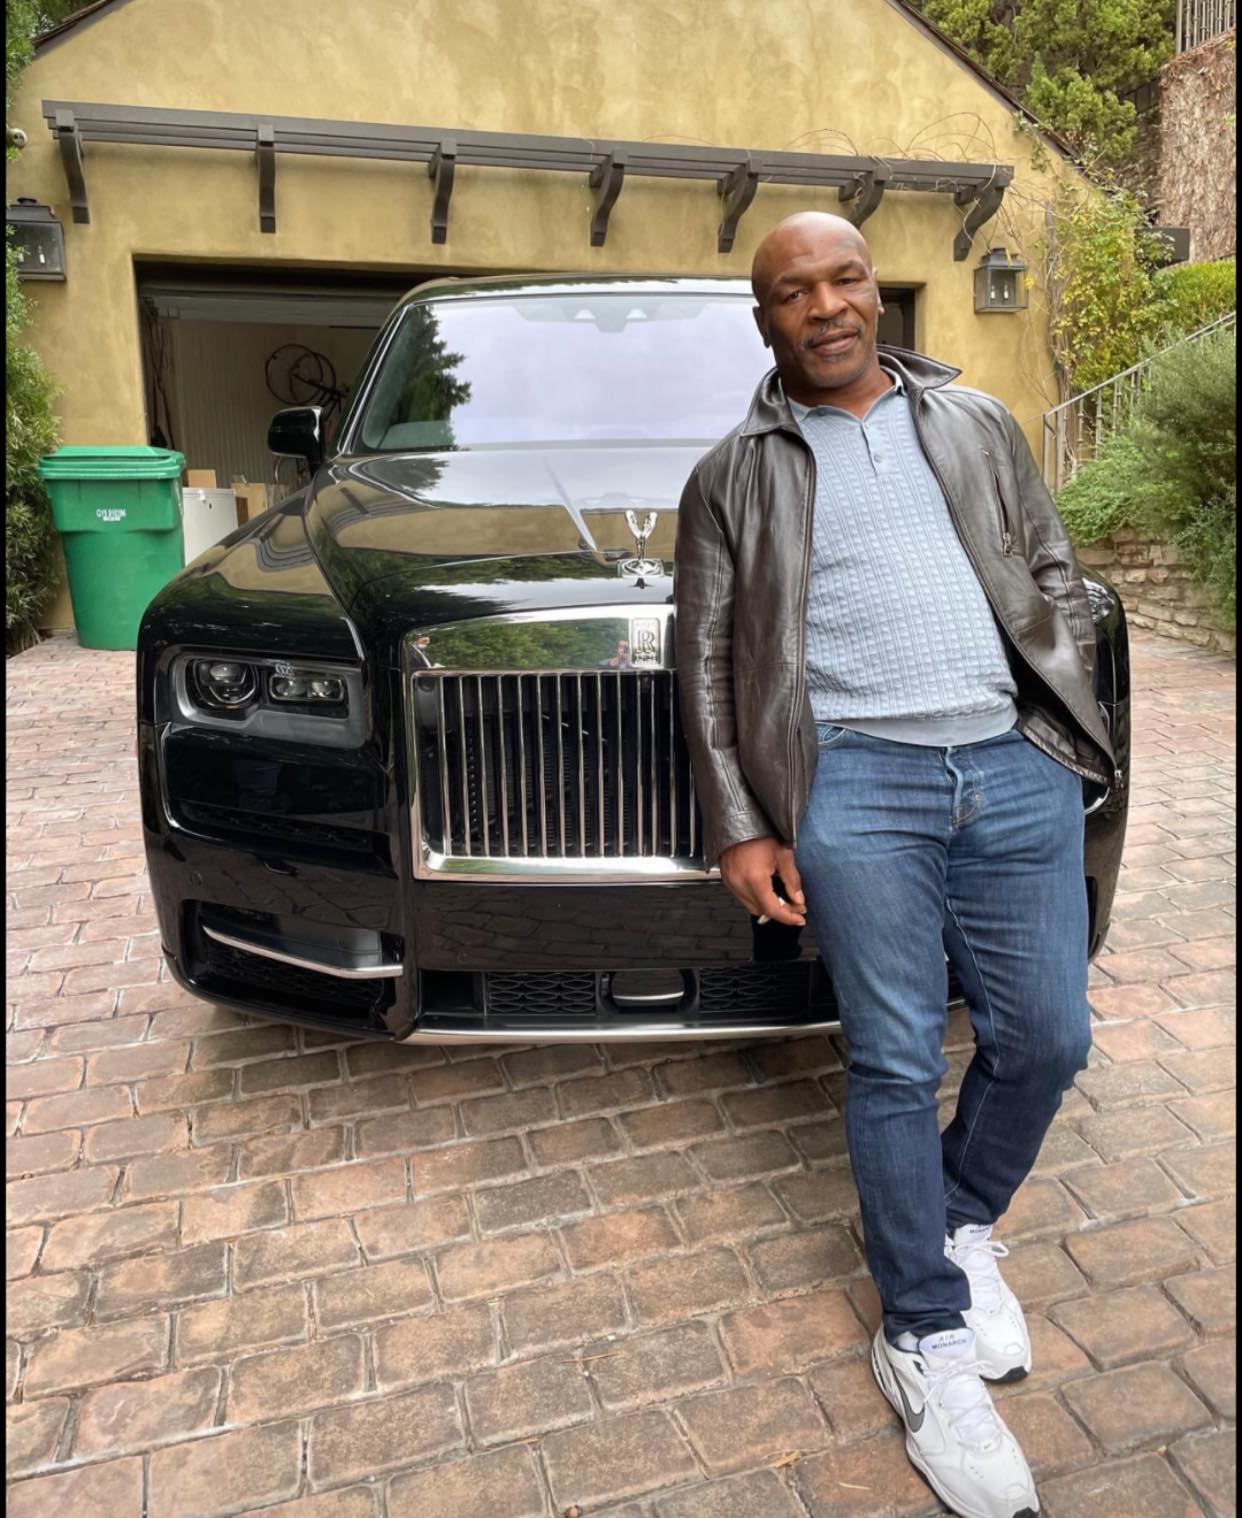 bao mike tyson s hobbies surpass everyone s imagination as he owns a supercar for leisurely drives while accompanied by his pet white tiger 65446ffc270d1 Mike Tyson's Hobbies Surpass Everyone's Imagination As He Owns A Supercar For Leisurely Drives While Accompanied By His Pet White Tiger.